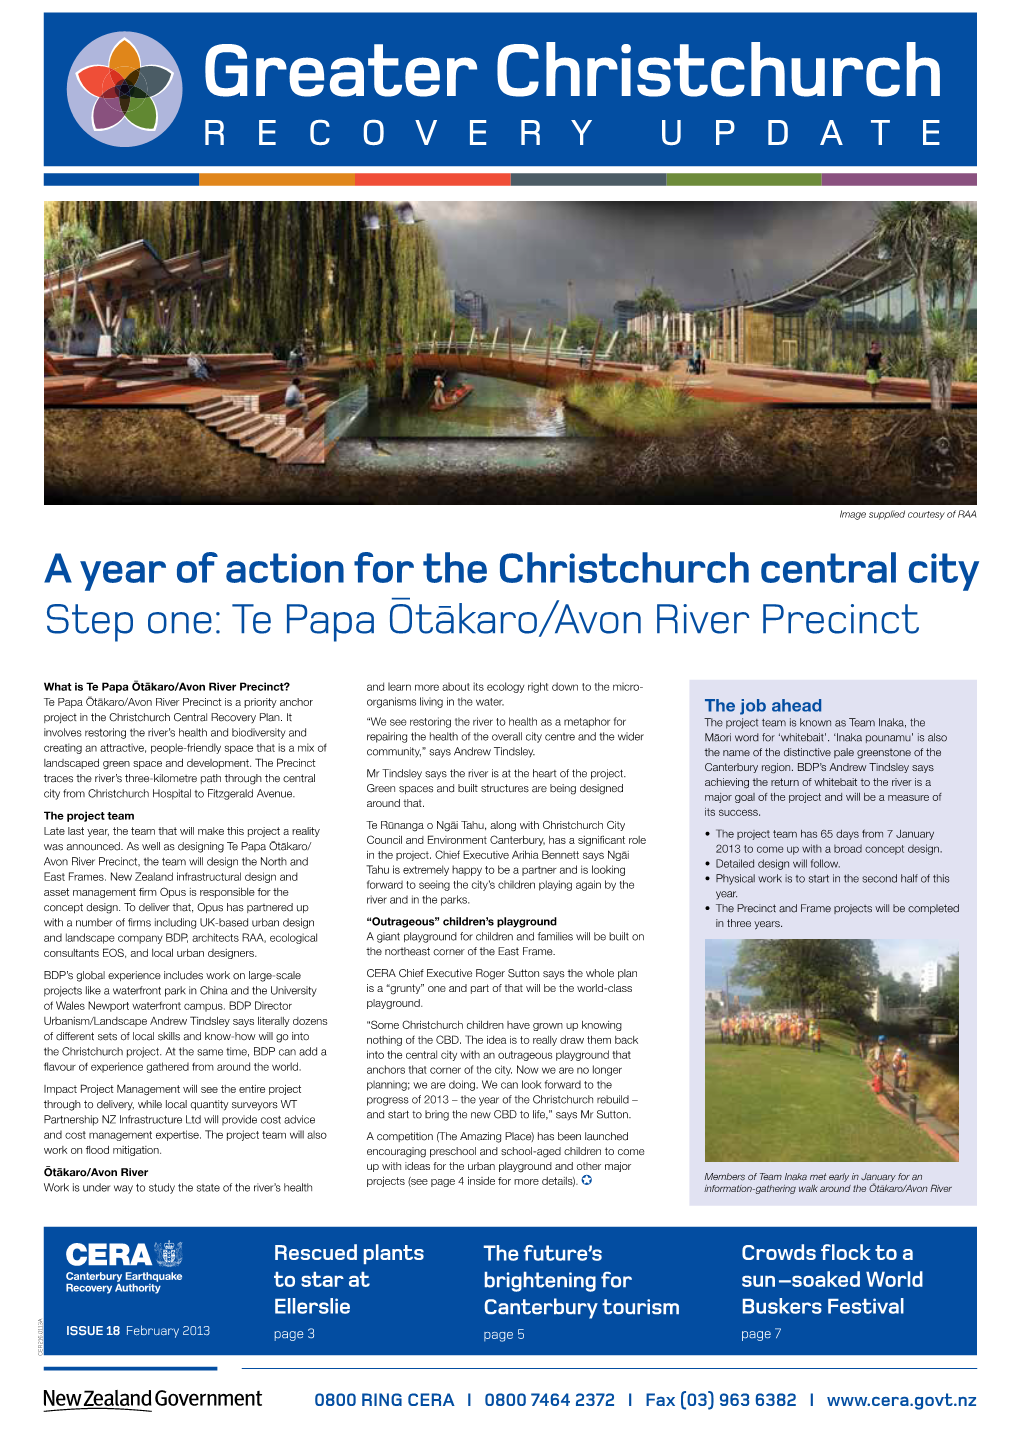 Greater Christchurch Recovery Update February 2013